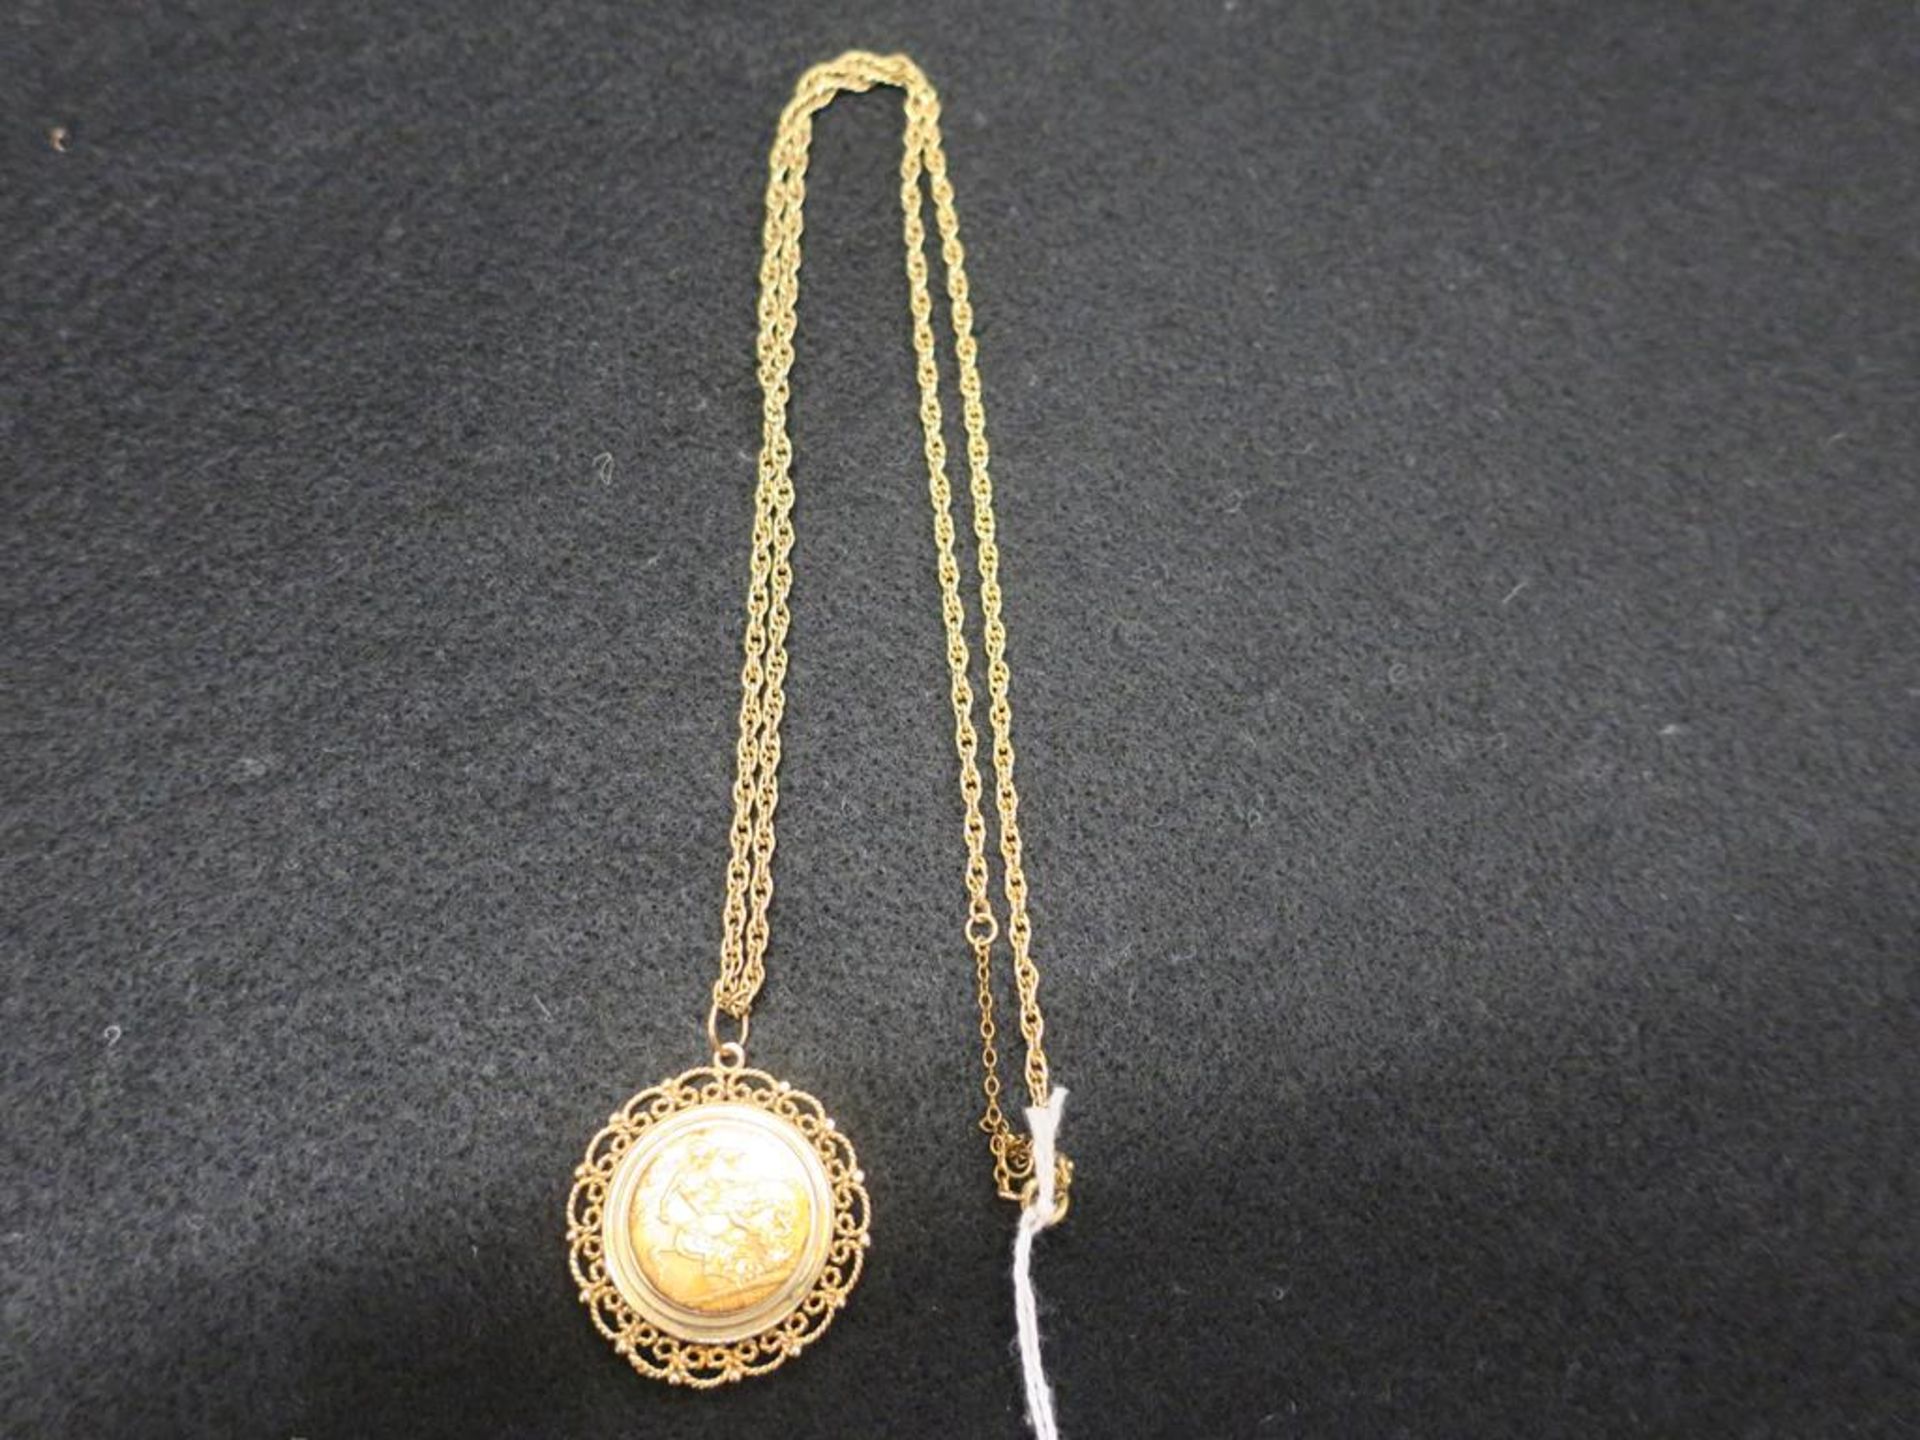 A George V 1917 Full Sovereign Loosely Mounted as a Pendant on a 9ct Gold Chain. Total Weight (